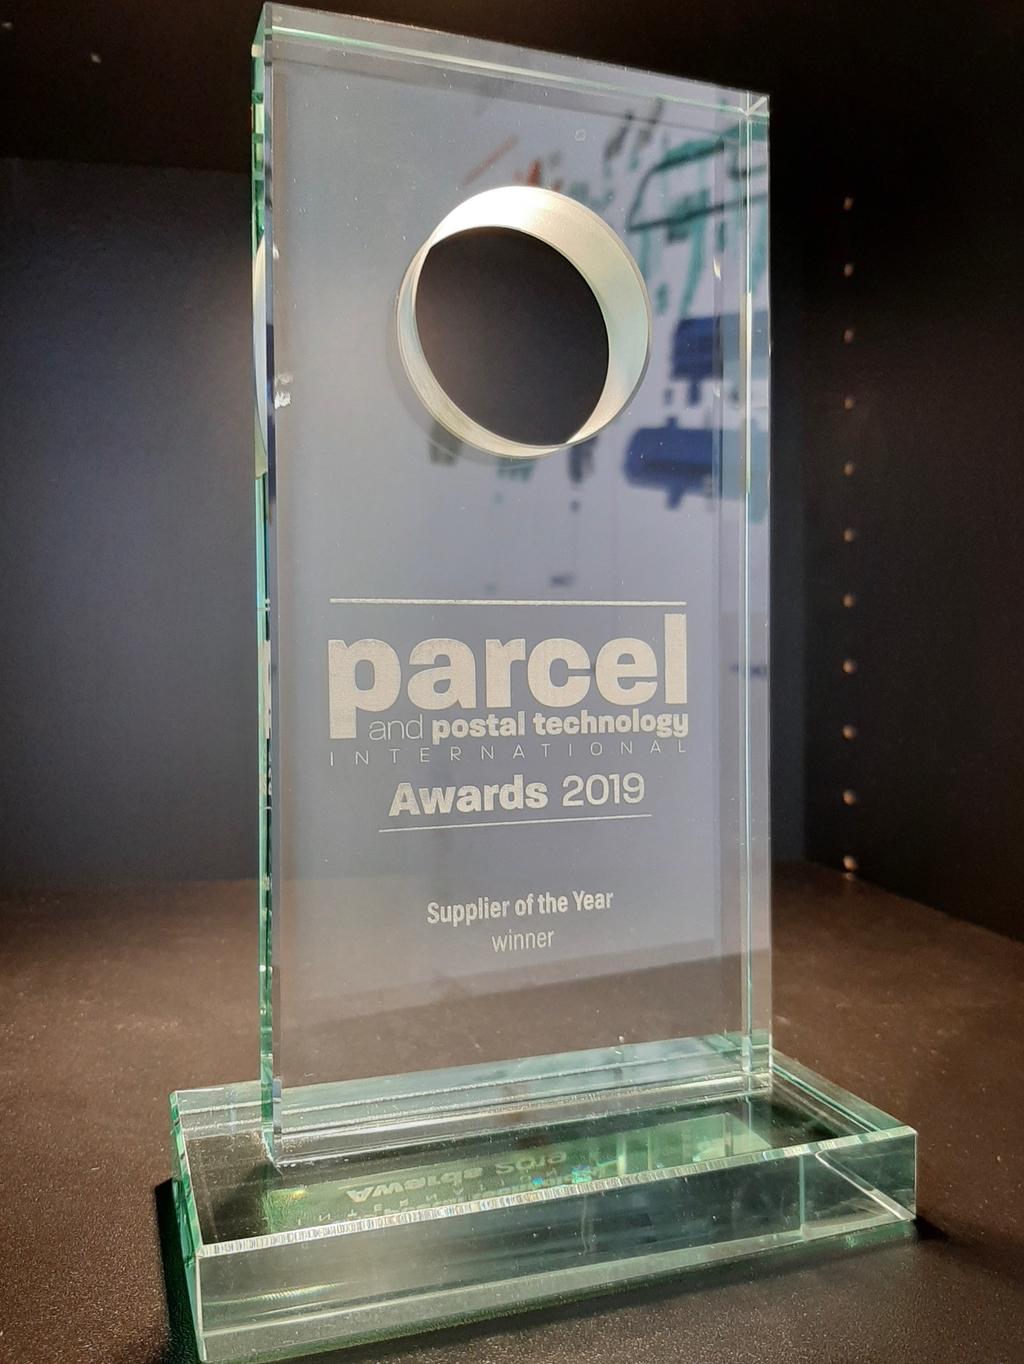 Parcel and postal technology - Awards Supplier of the year